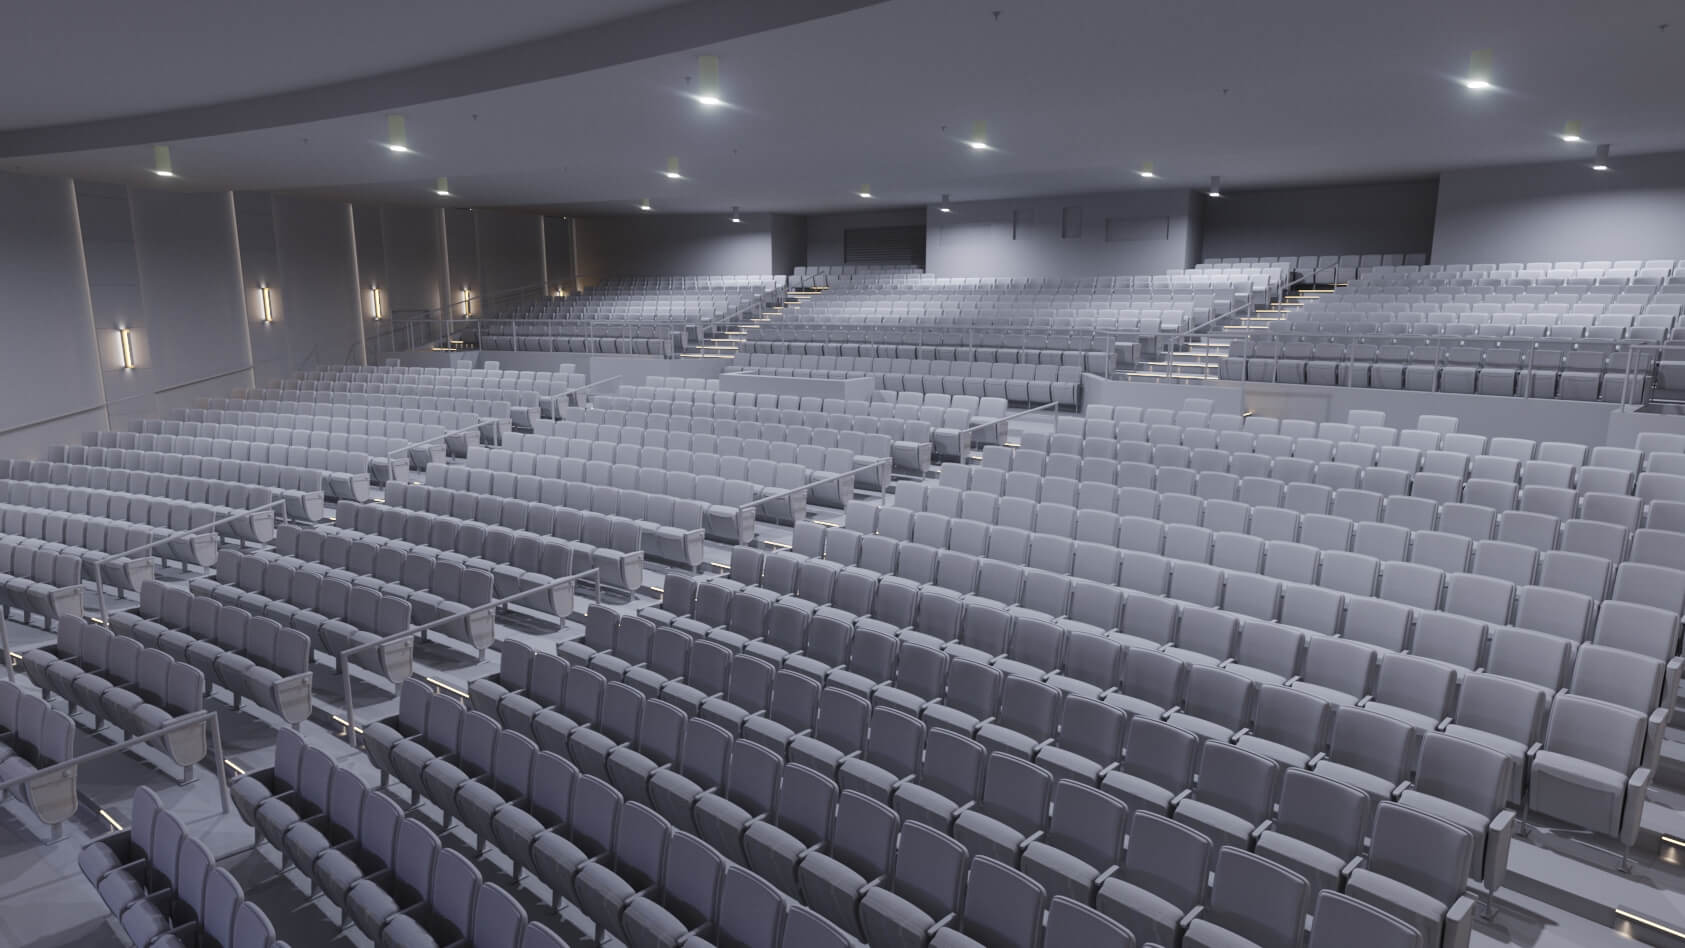 Photorealistic 3D Animation for a Theater Renovation